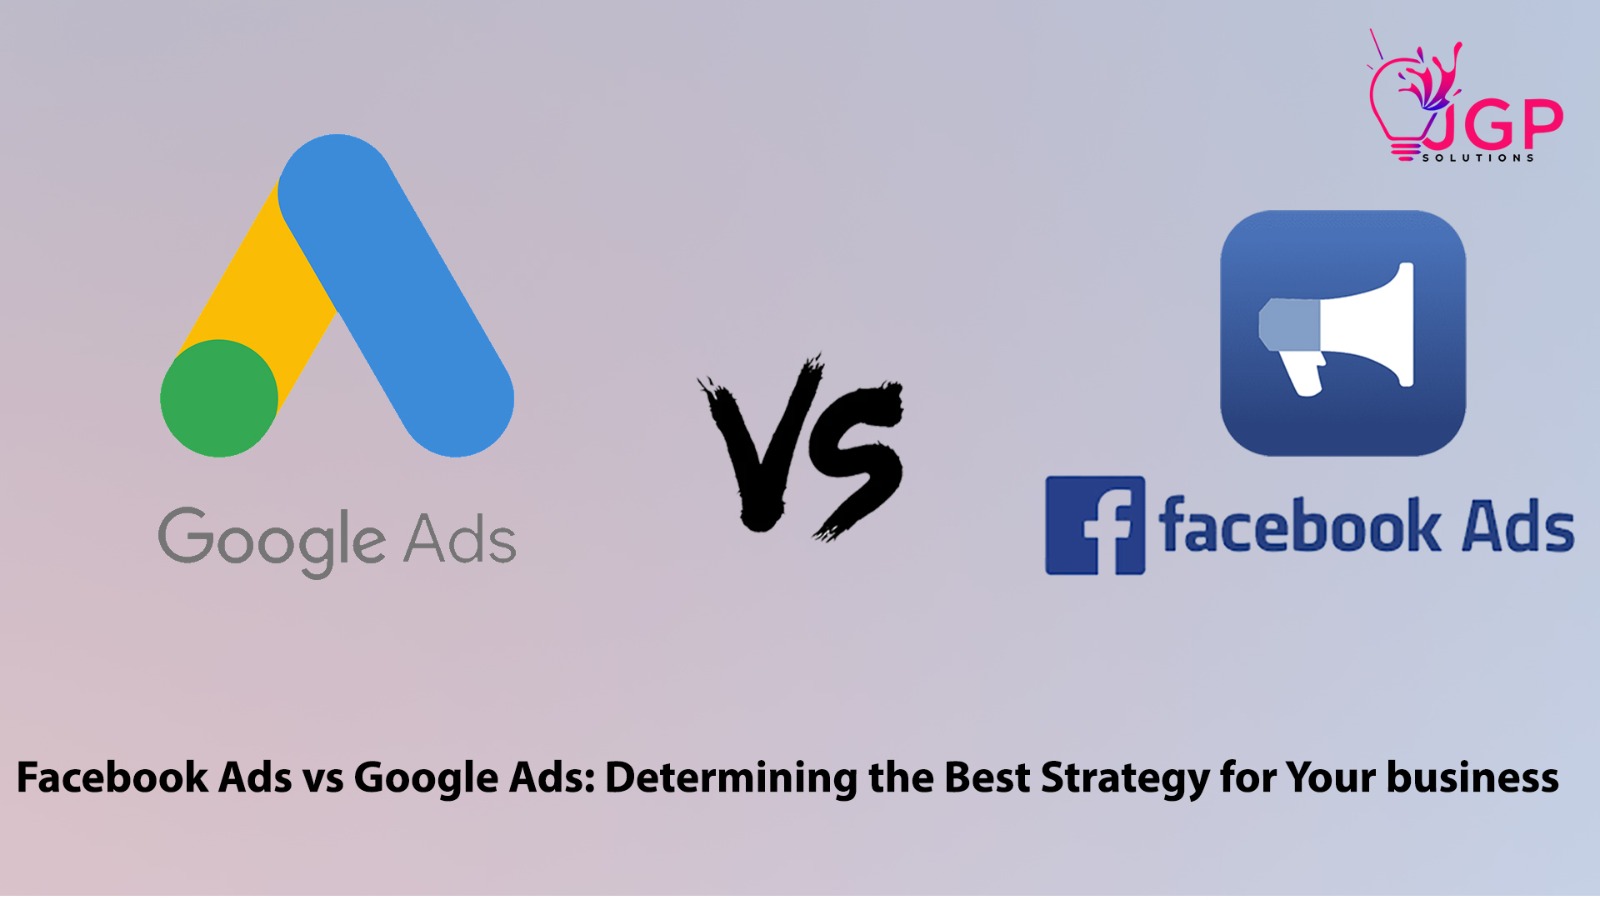 Facebook Ads vs Google Ads: Determining the Best Strategy for Your Business